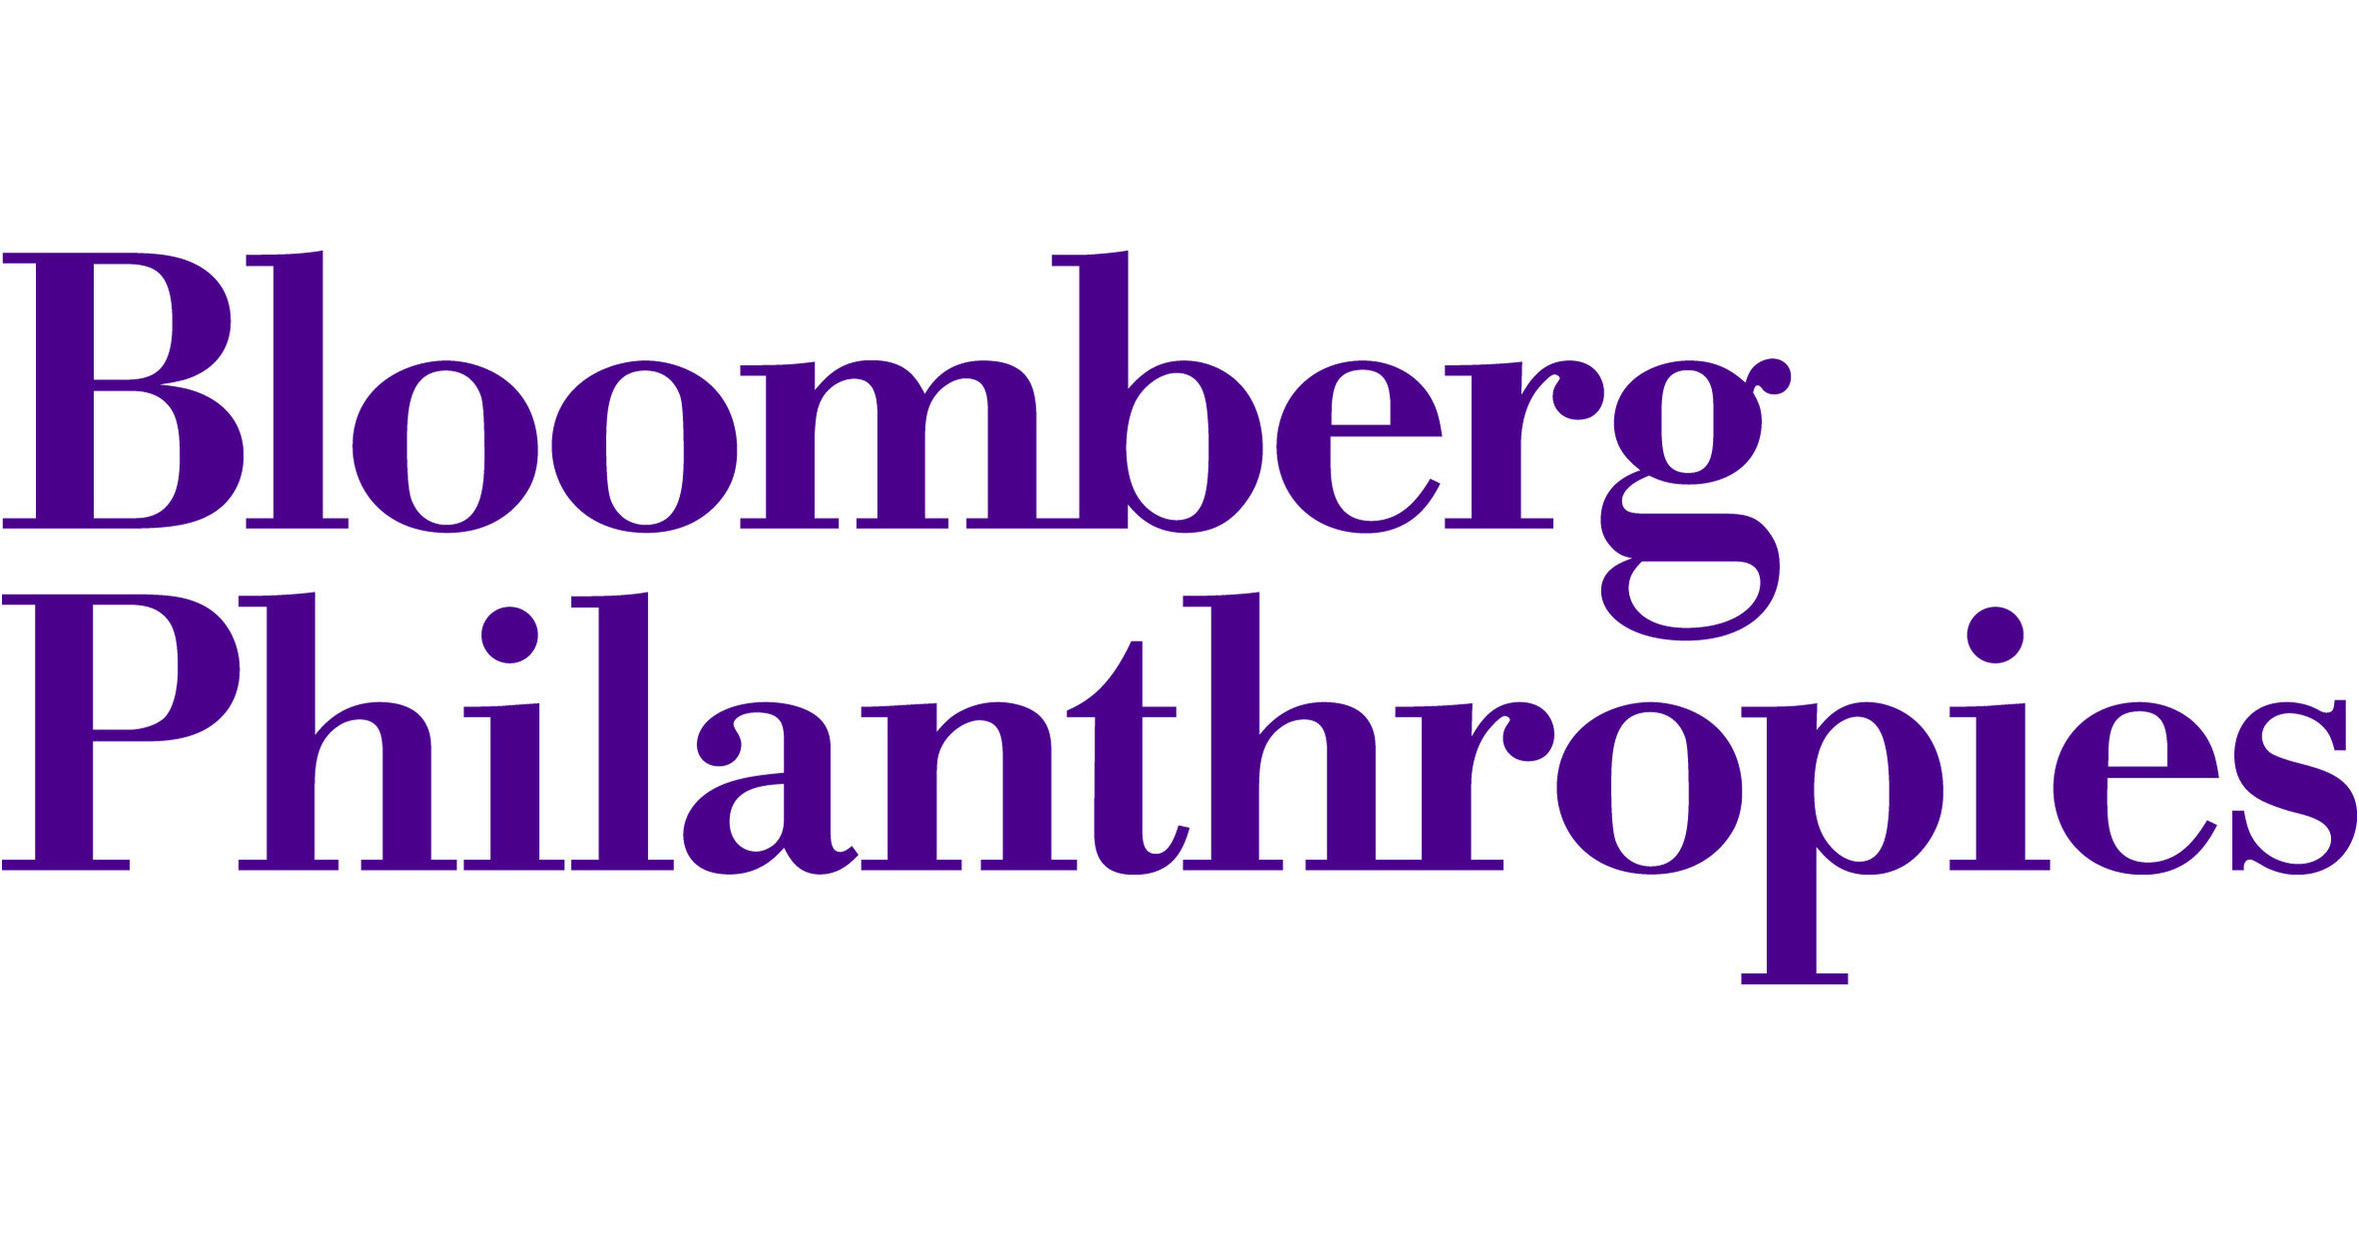 BLOOMBERG PHILANTHROPIES AND THE SAGOL FAMILY LAUNCH THE BLOOMBERG-SAGOL CENTER FOR CITY LEADERSHIP AT TEL AVIV UNIVERSITY USA